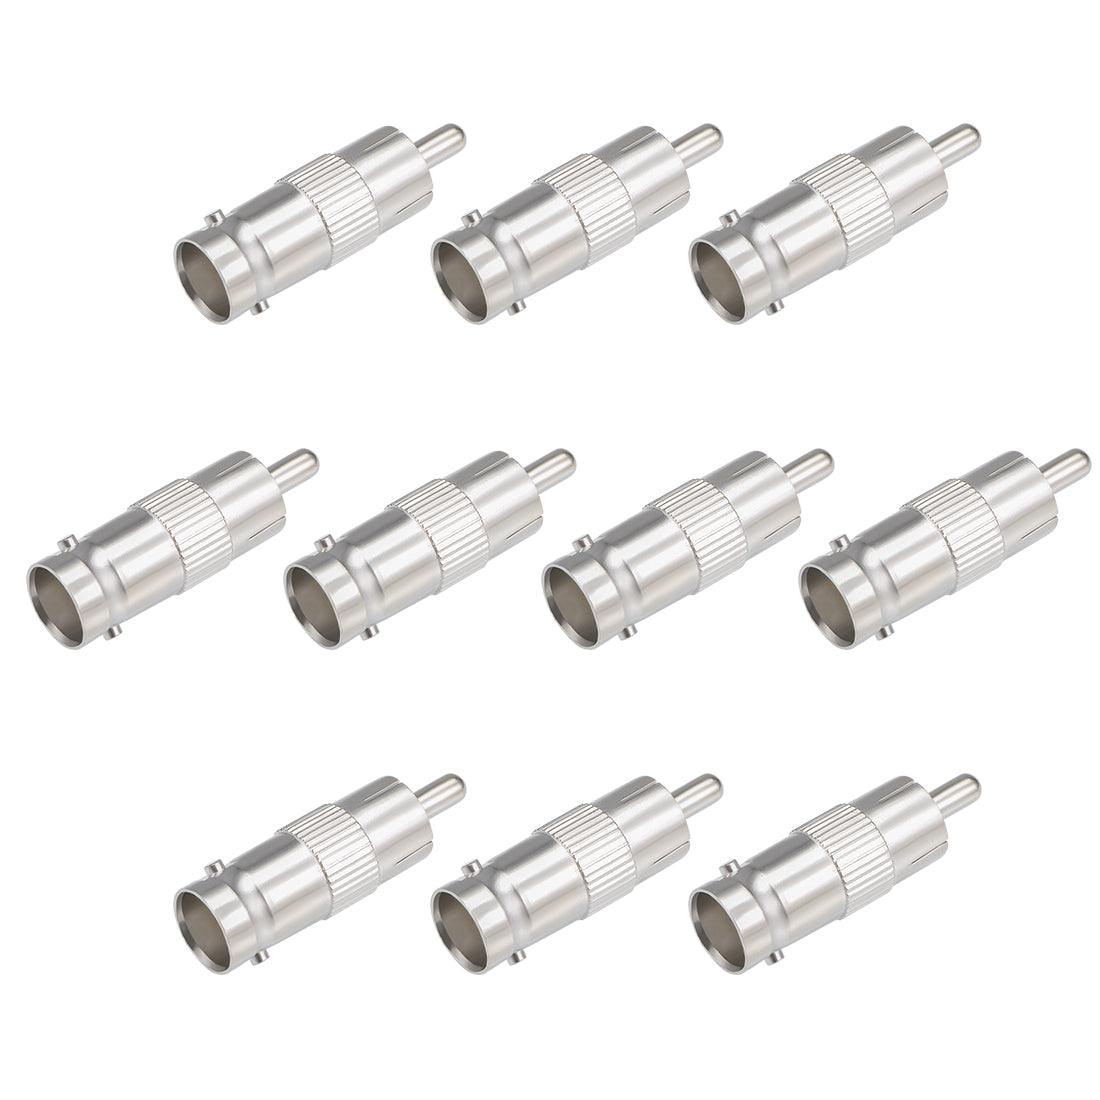 uxcell Uxcell 10pcs BNC Female to RCA Male Adapter Coaxial Cable Connector for CCTV Security Camera